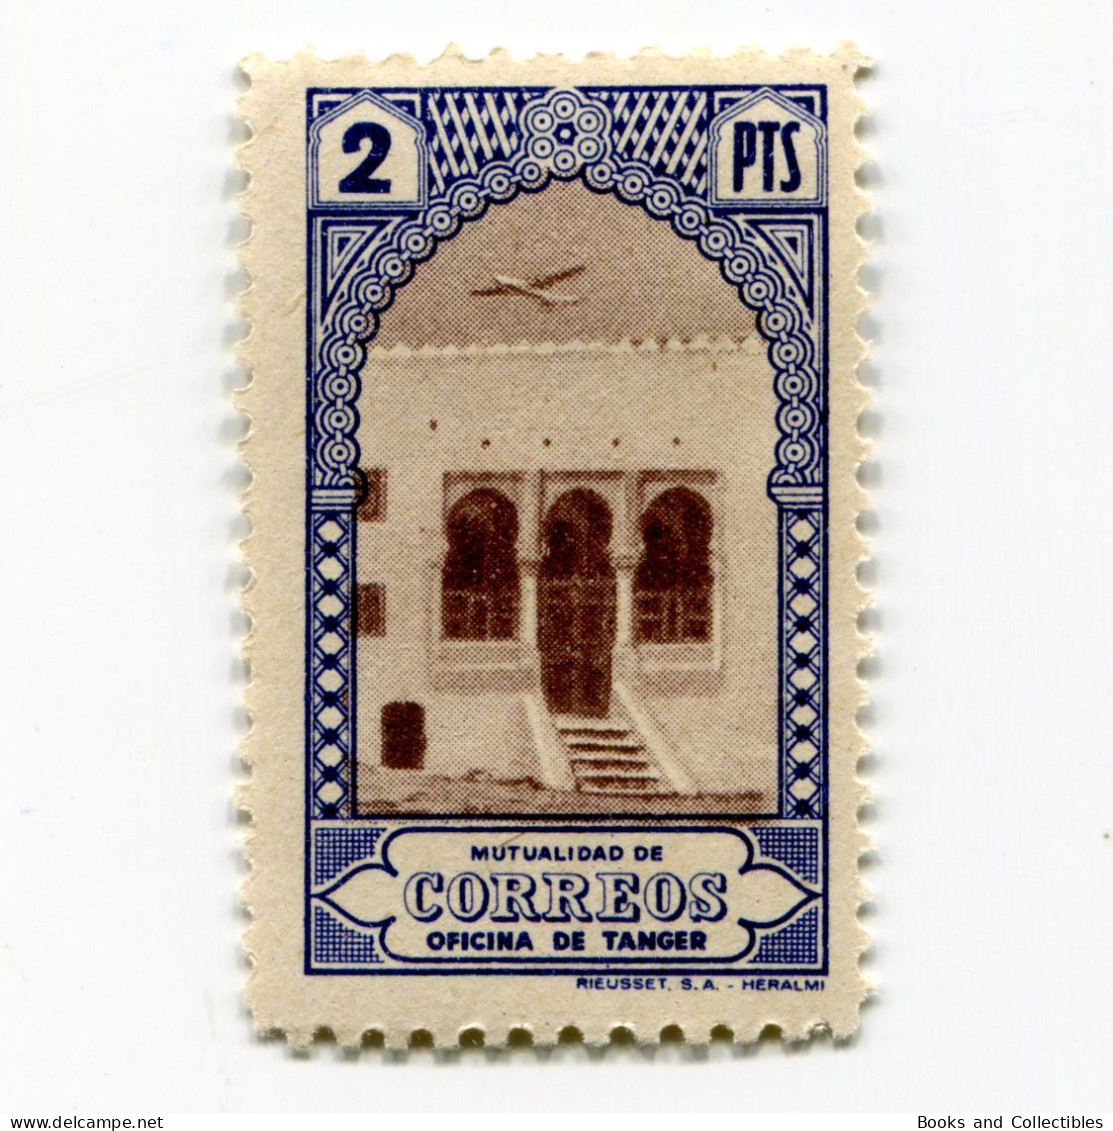 [FBL ● A-01] SPANISH TANGIER - 1946 - Beneficent Stamps - 2 Pts - Edifil ES-TNG BE33 - Charity